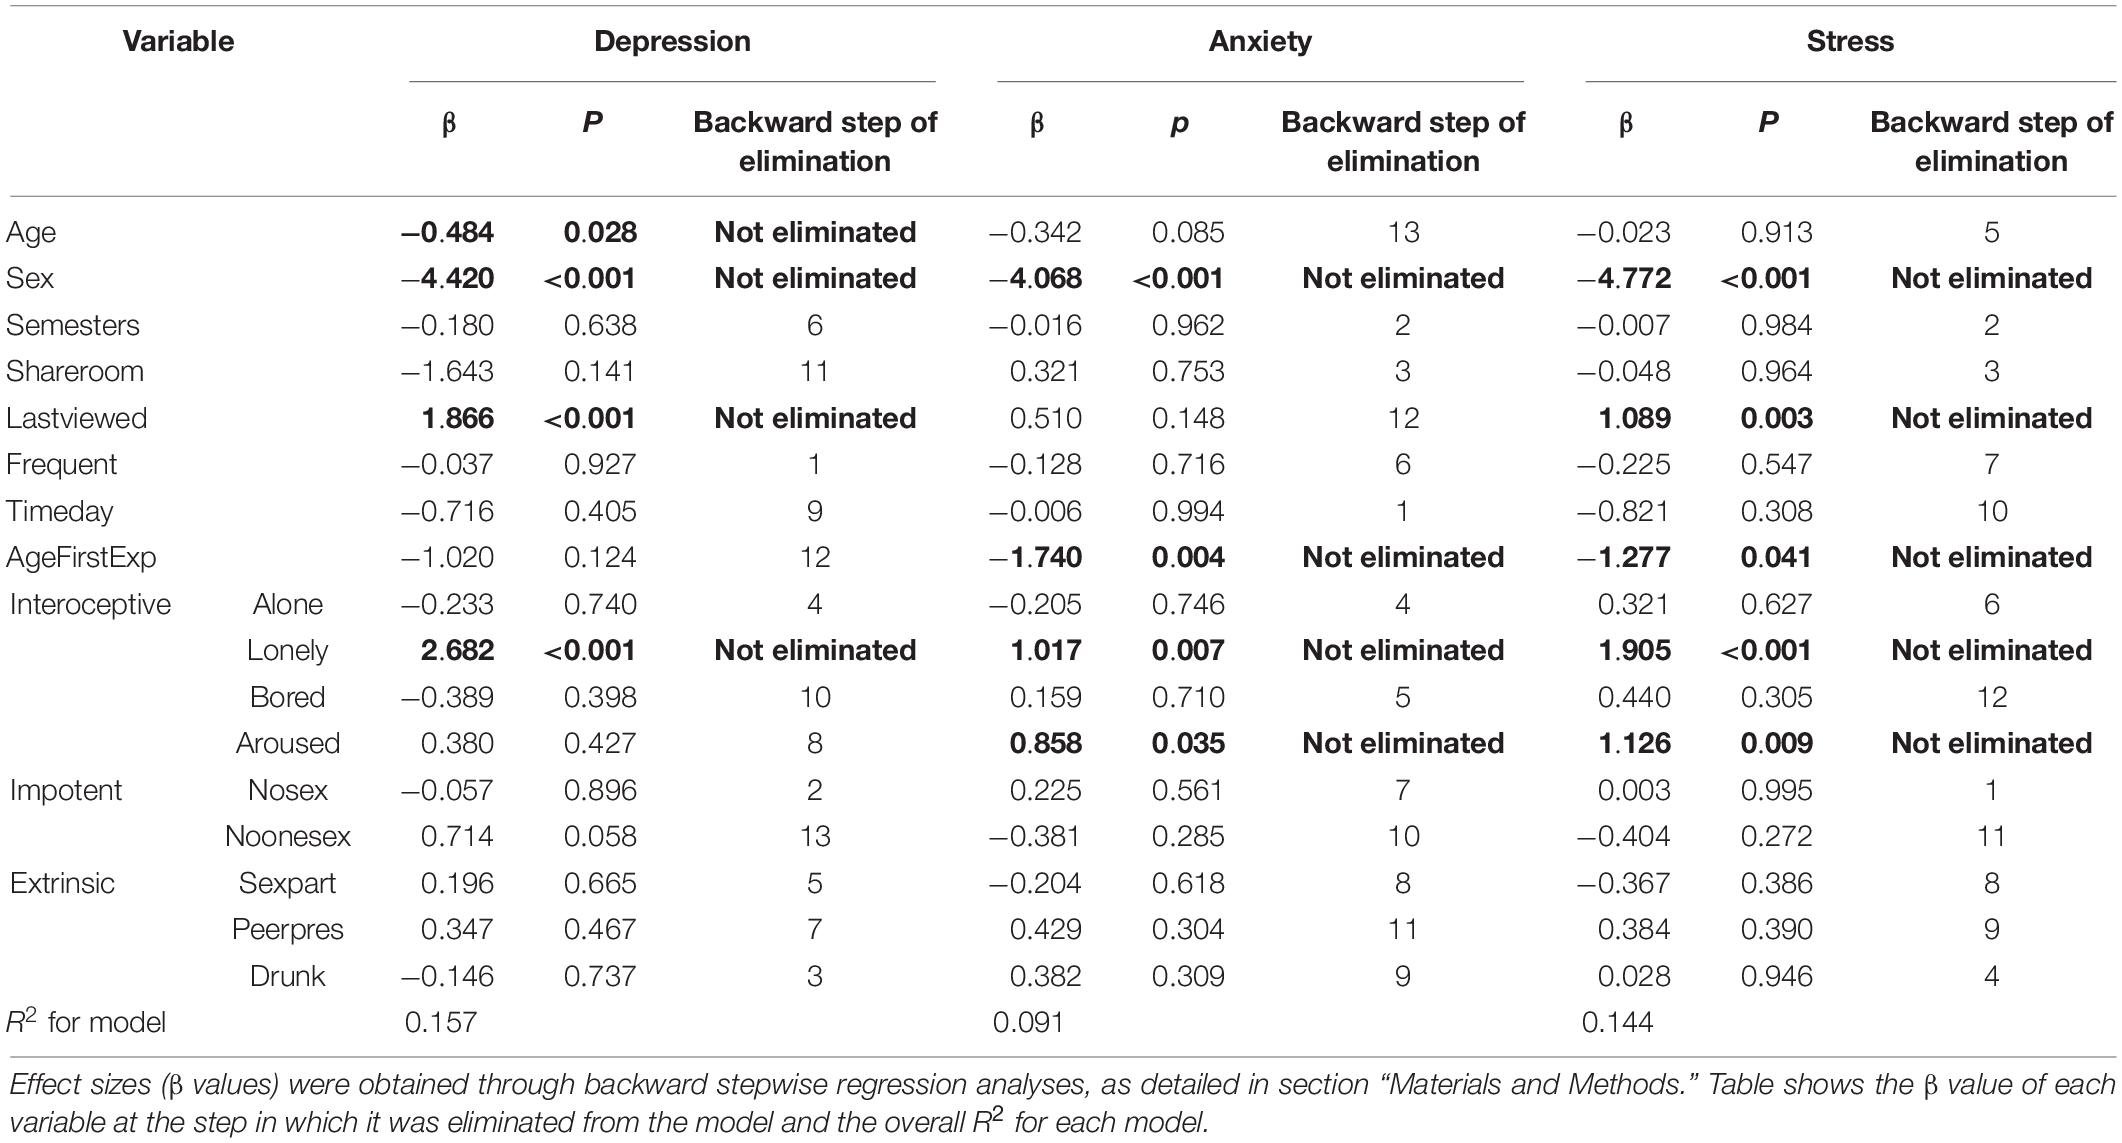 Firee Sax Xxx 18yars Girls Mouv Daunlod - Frontiers | Compulsive Internet Pornography Use and Mental Health: A  Cross-Sectional Study in a Sample of University Students in the United  States